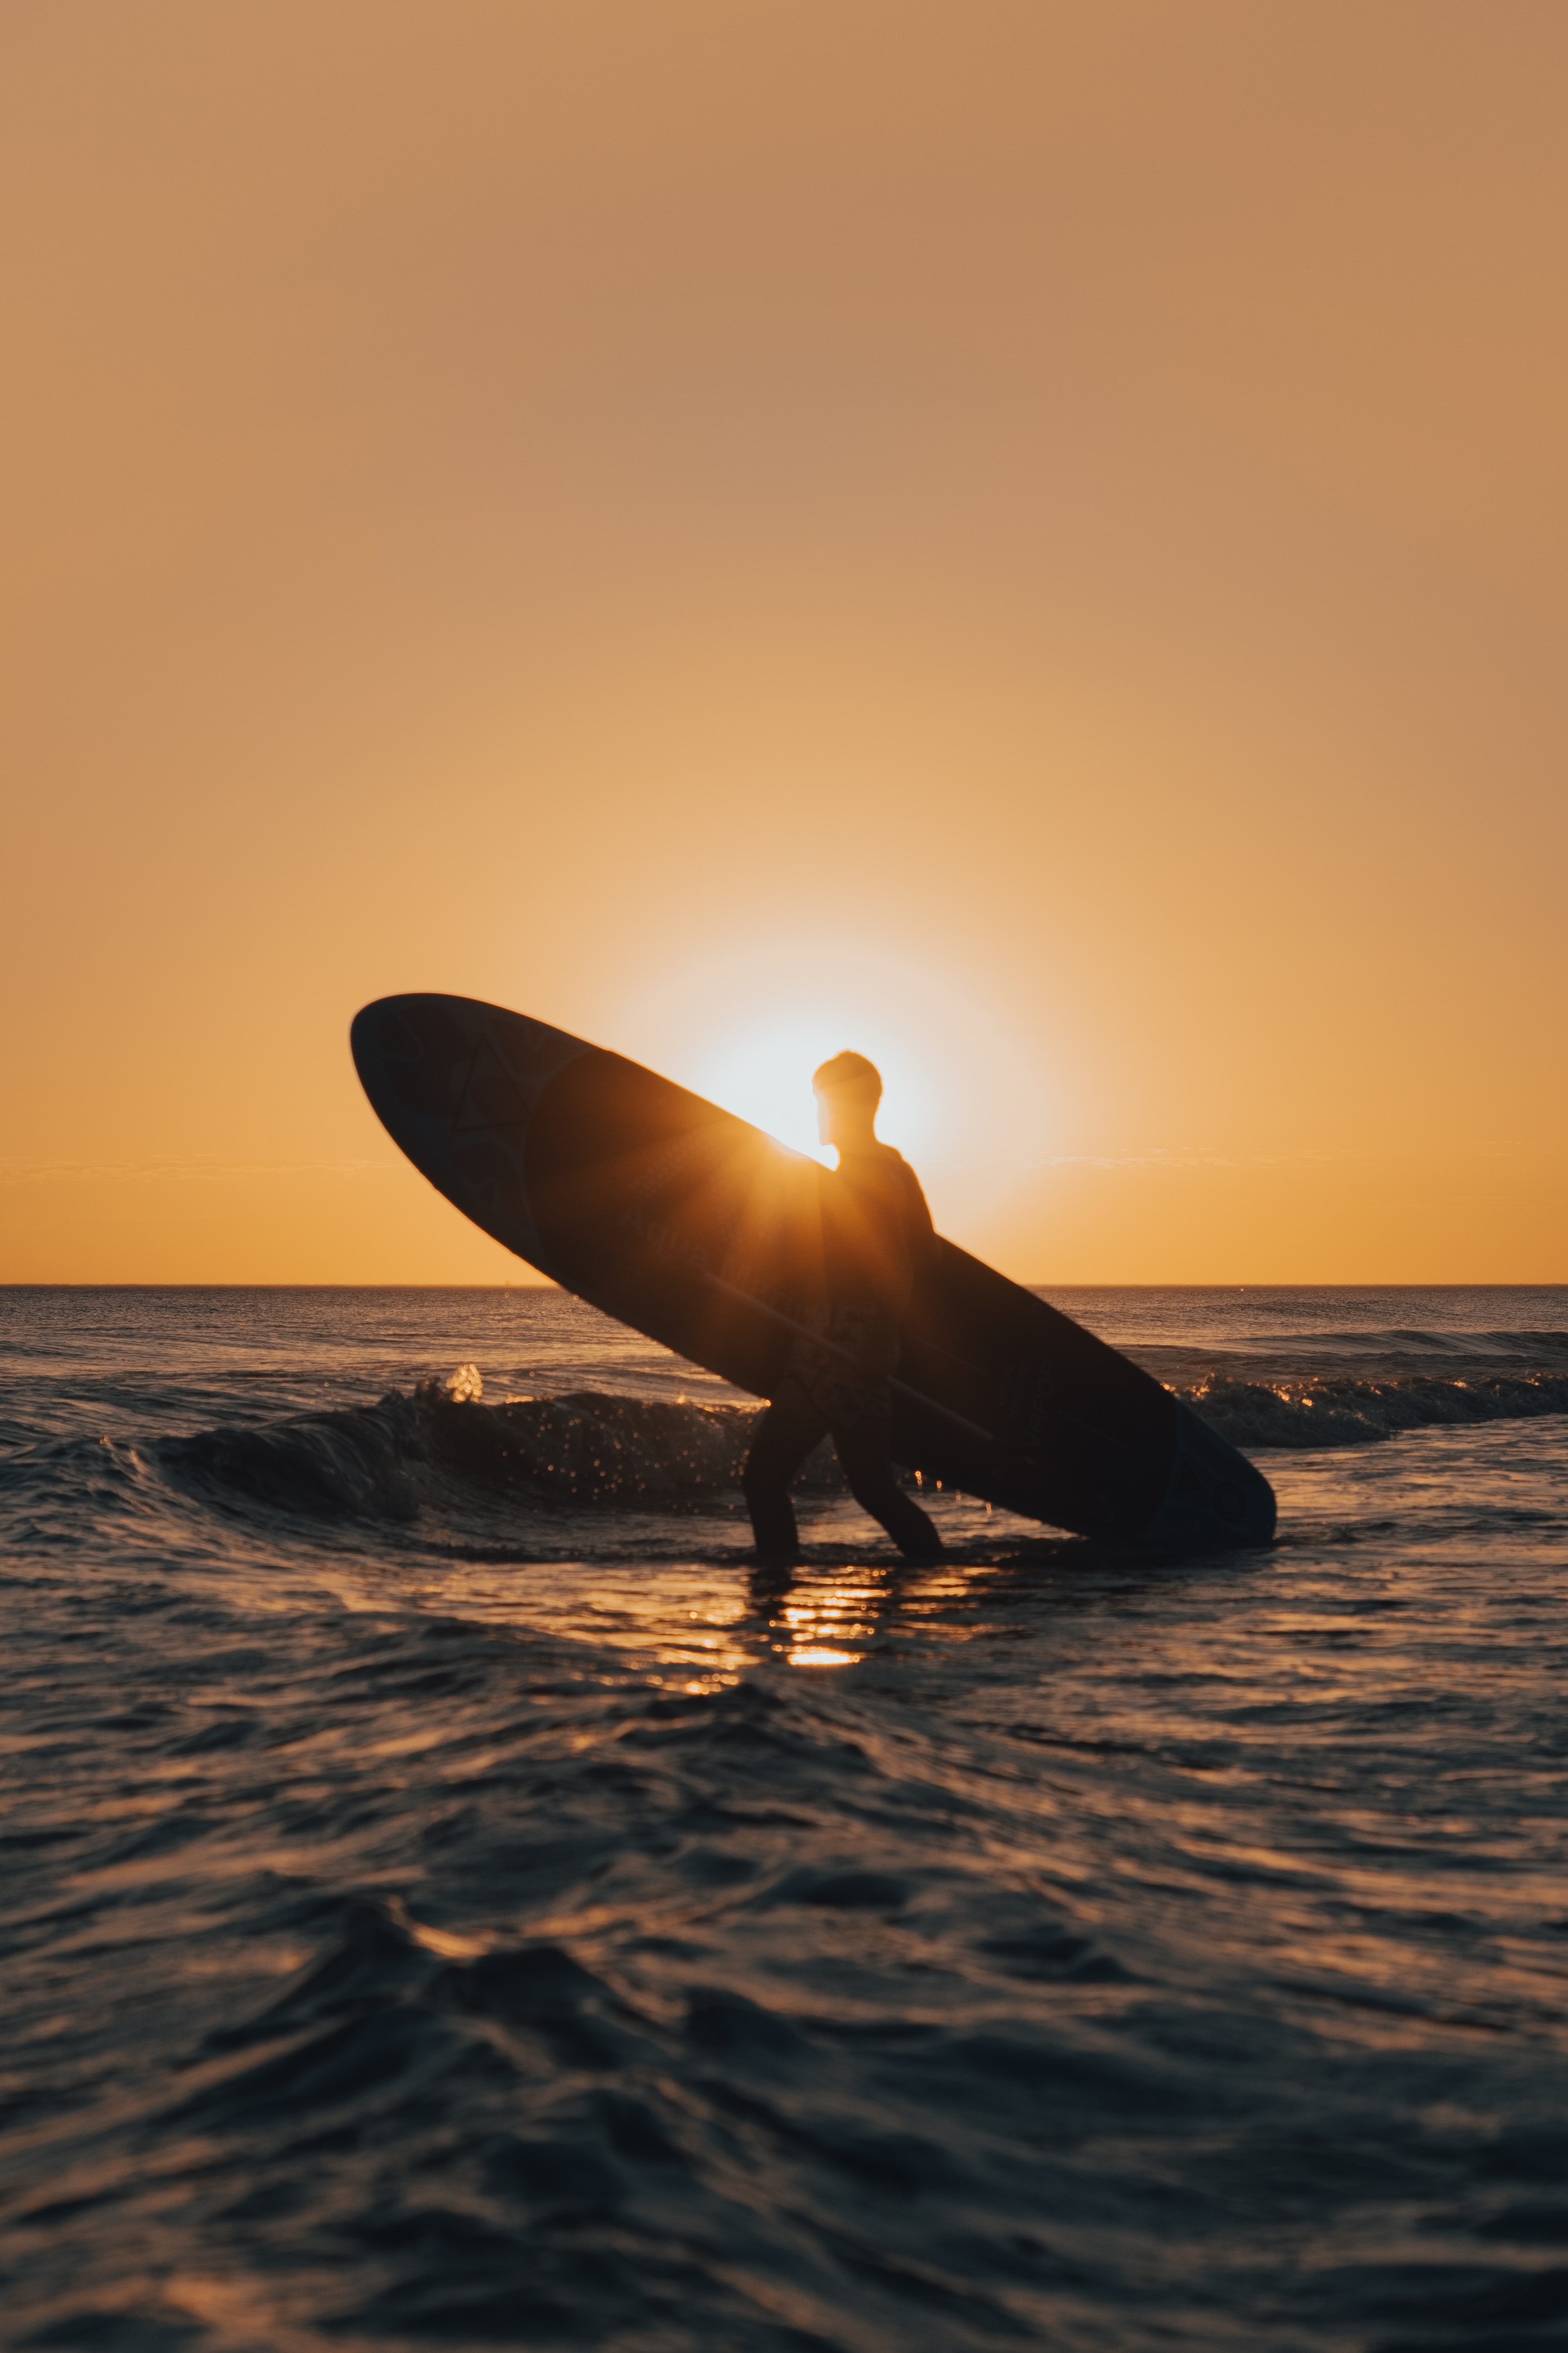 sports, sunset, waves, serfing, silhouette, surfer